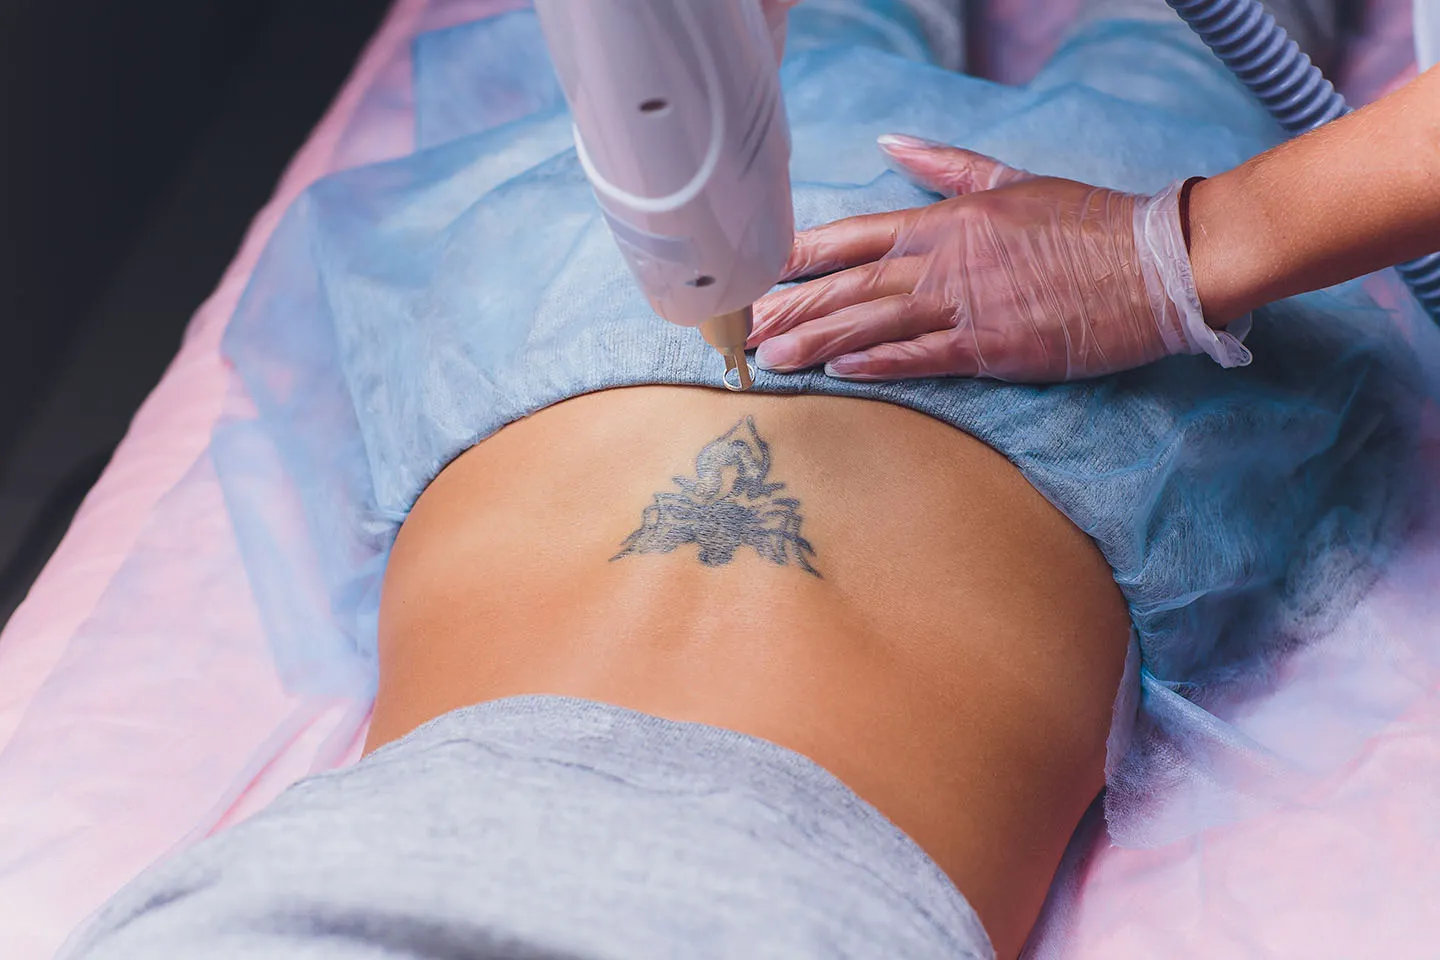 Laser Tattoo Removal - Ex name near pubis - Newhope Laser Skin Care -  Orange County, CA - Video - RealSelf